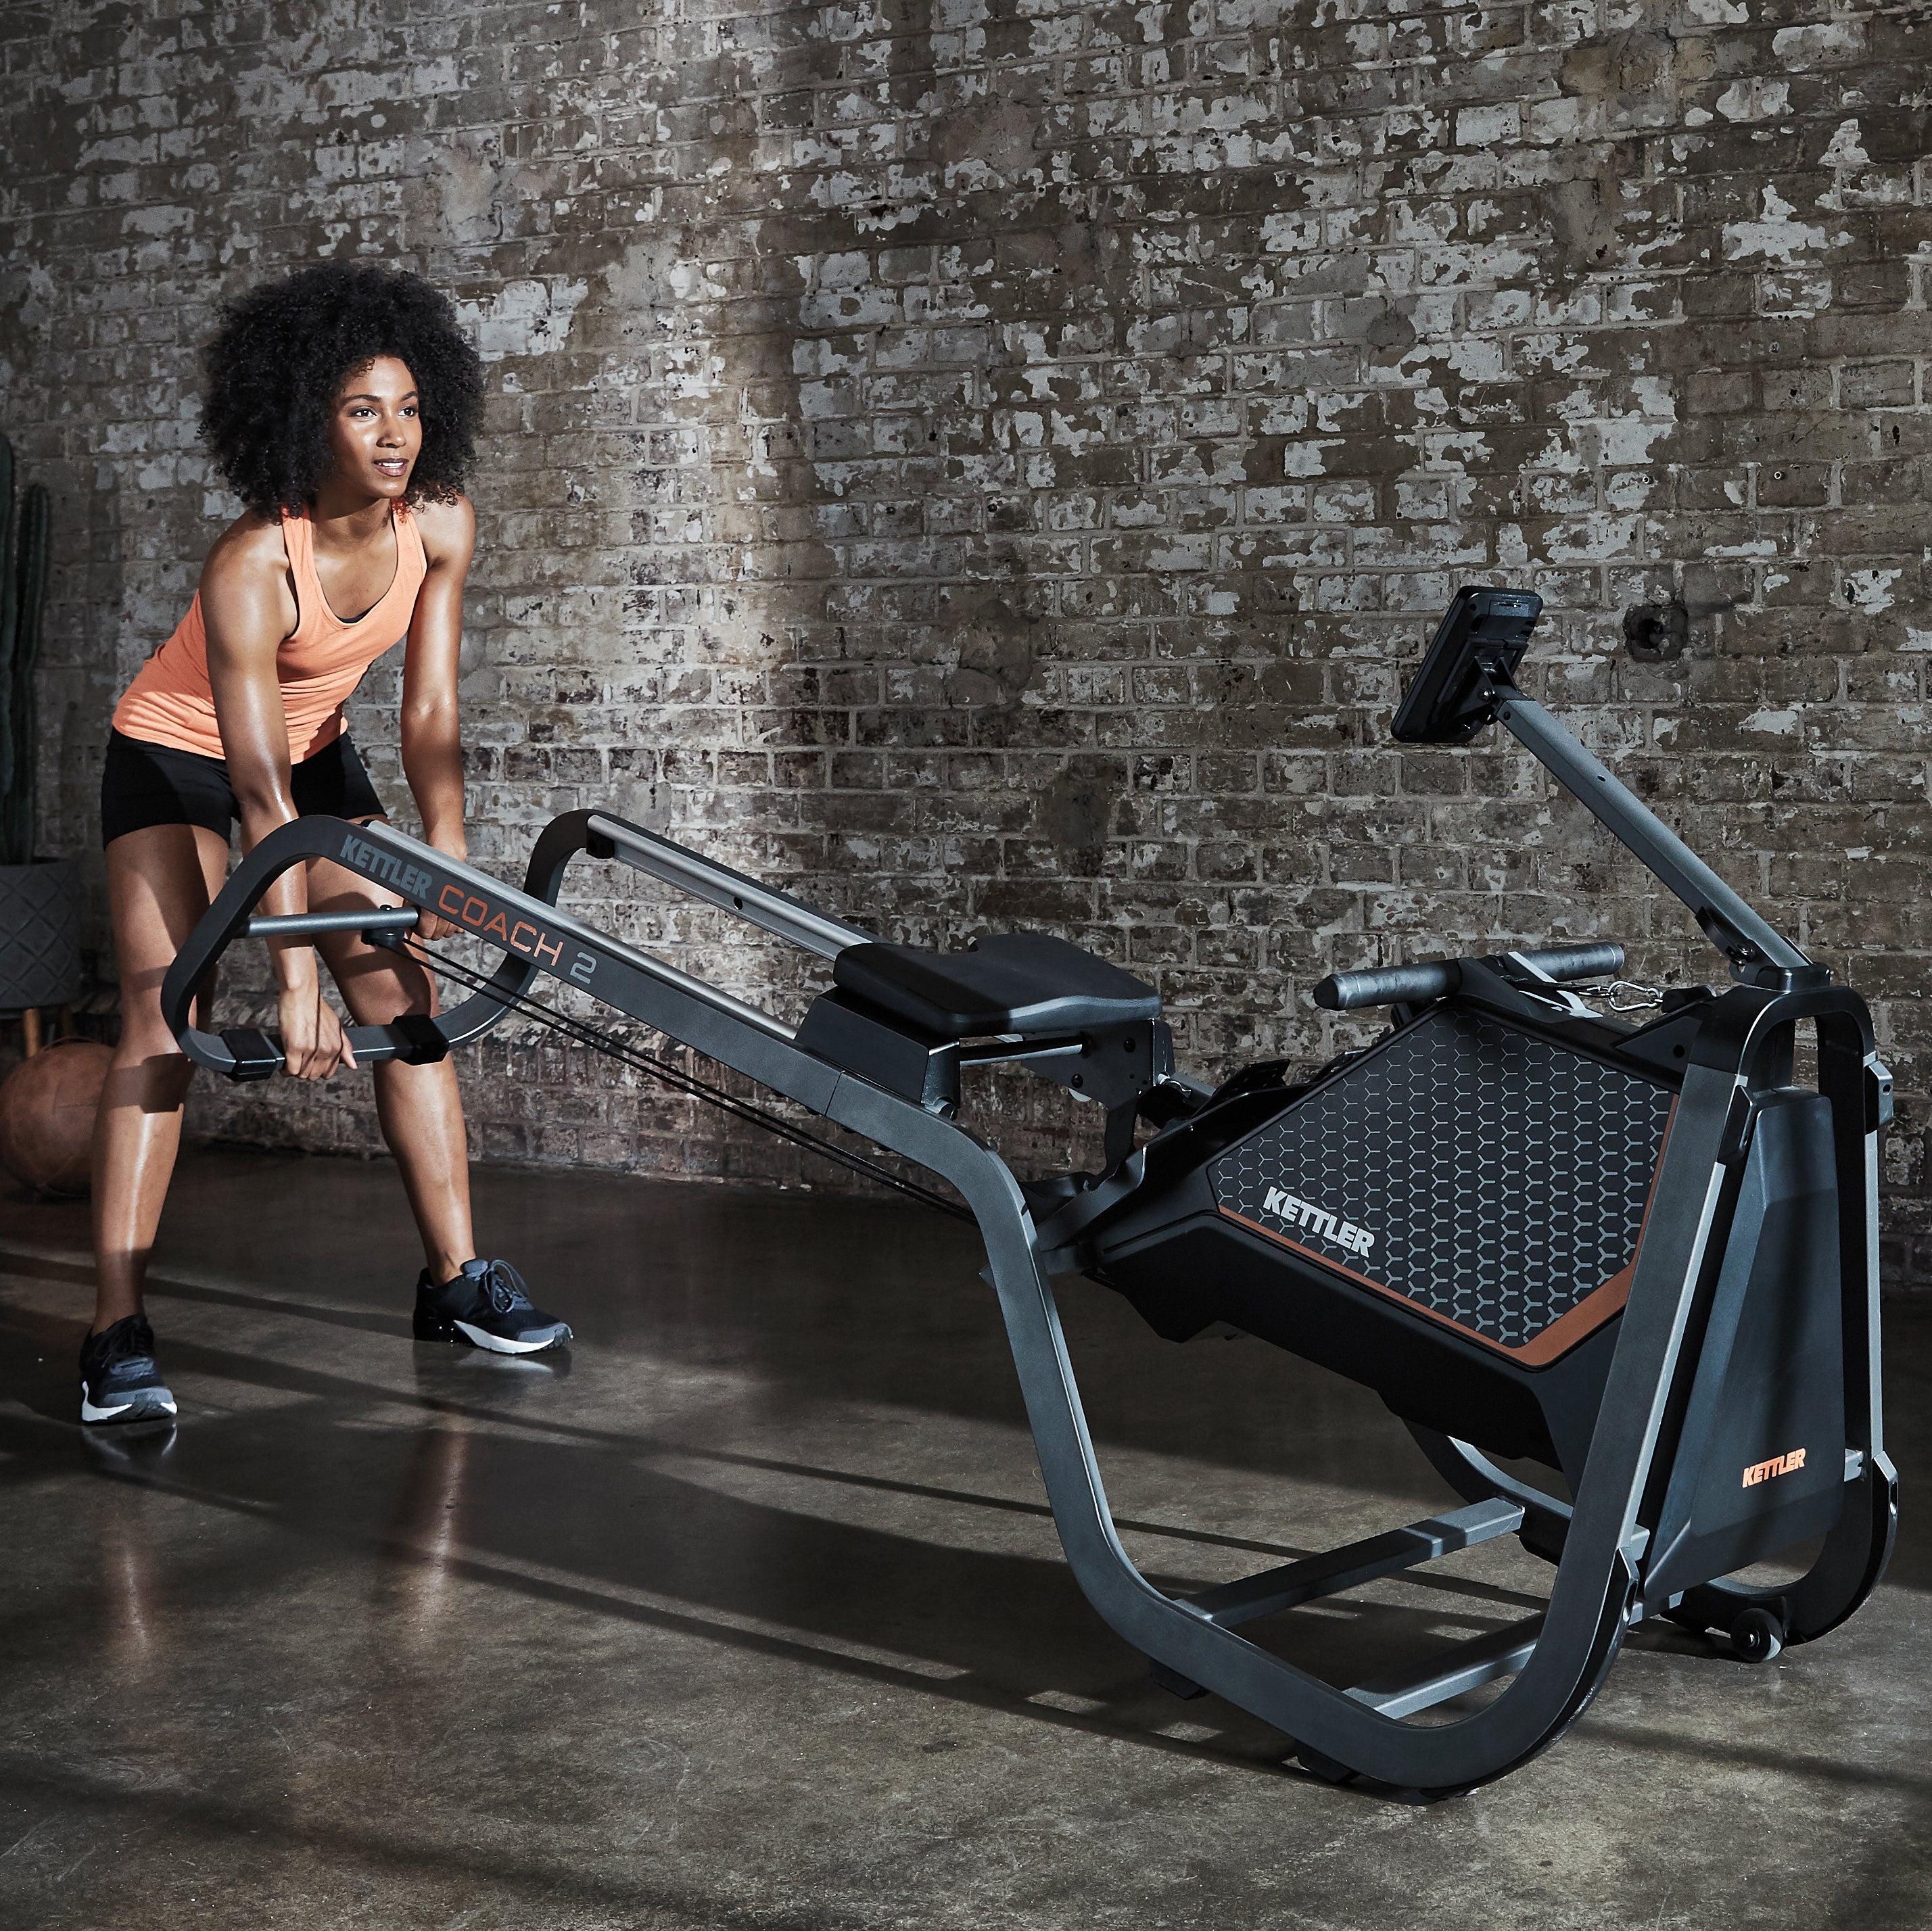 Lifestyle image of the Coach 2 Rowing Machine being transported by model.